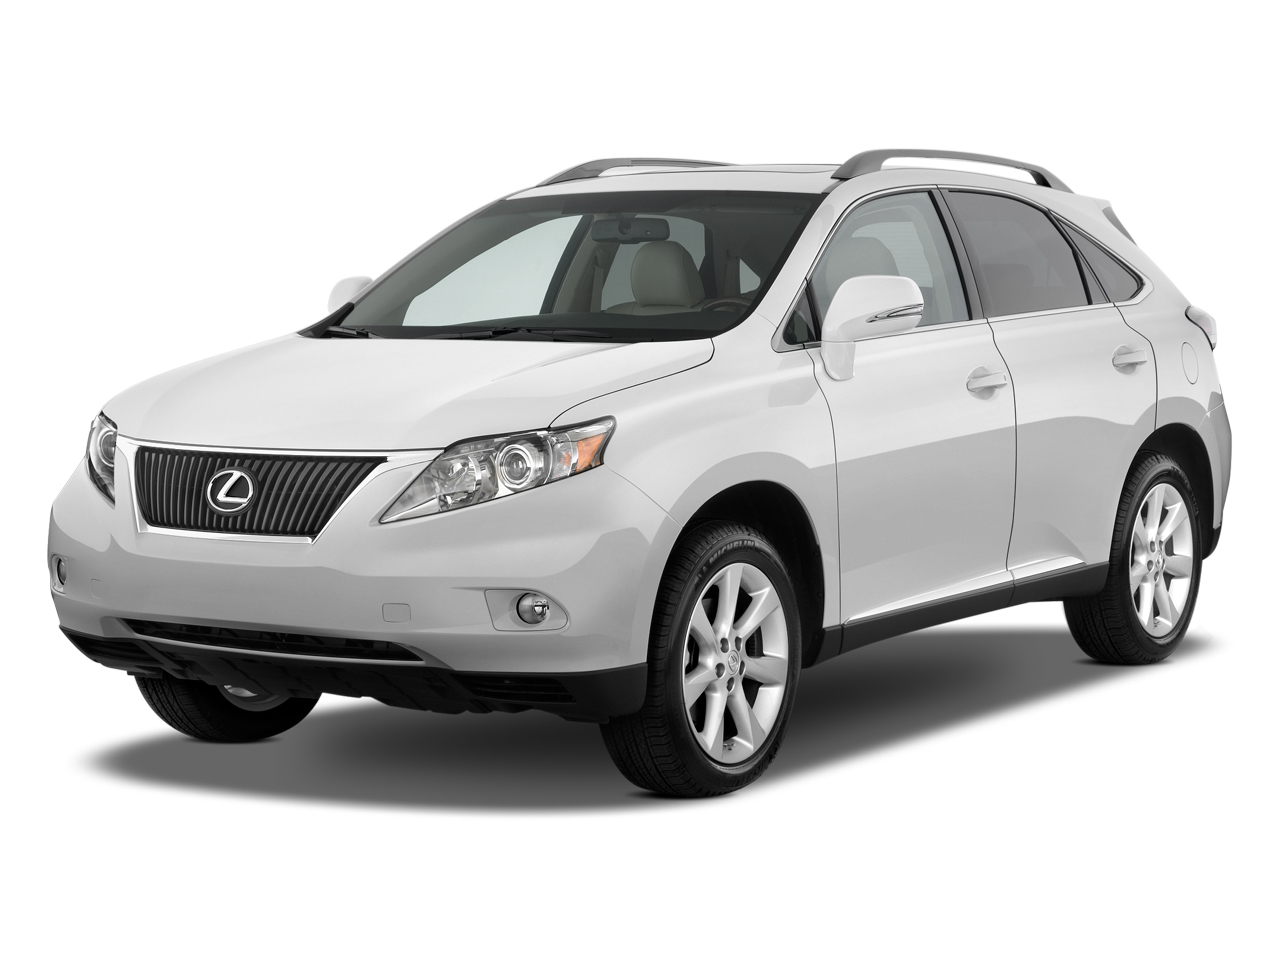 2011 Lexus Rx Review Ratings Specs Prices And Photos